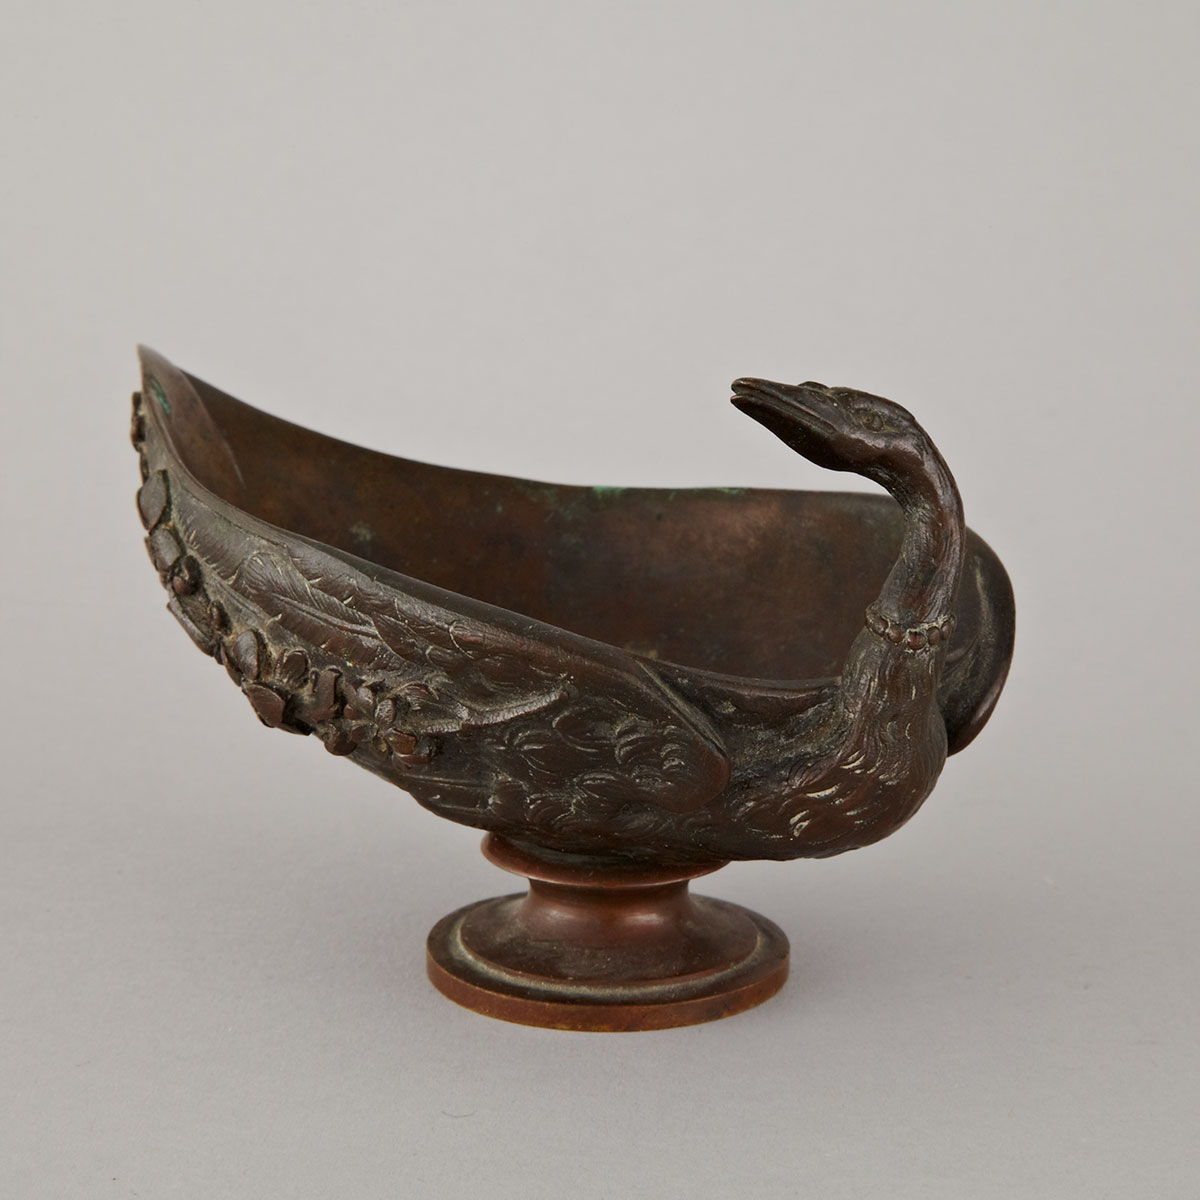 Small French Bronze Swan Form Dish, 19th century